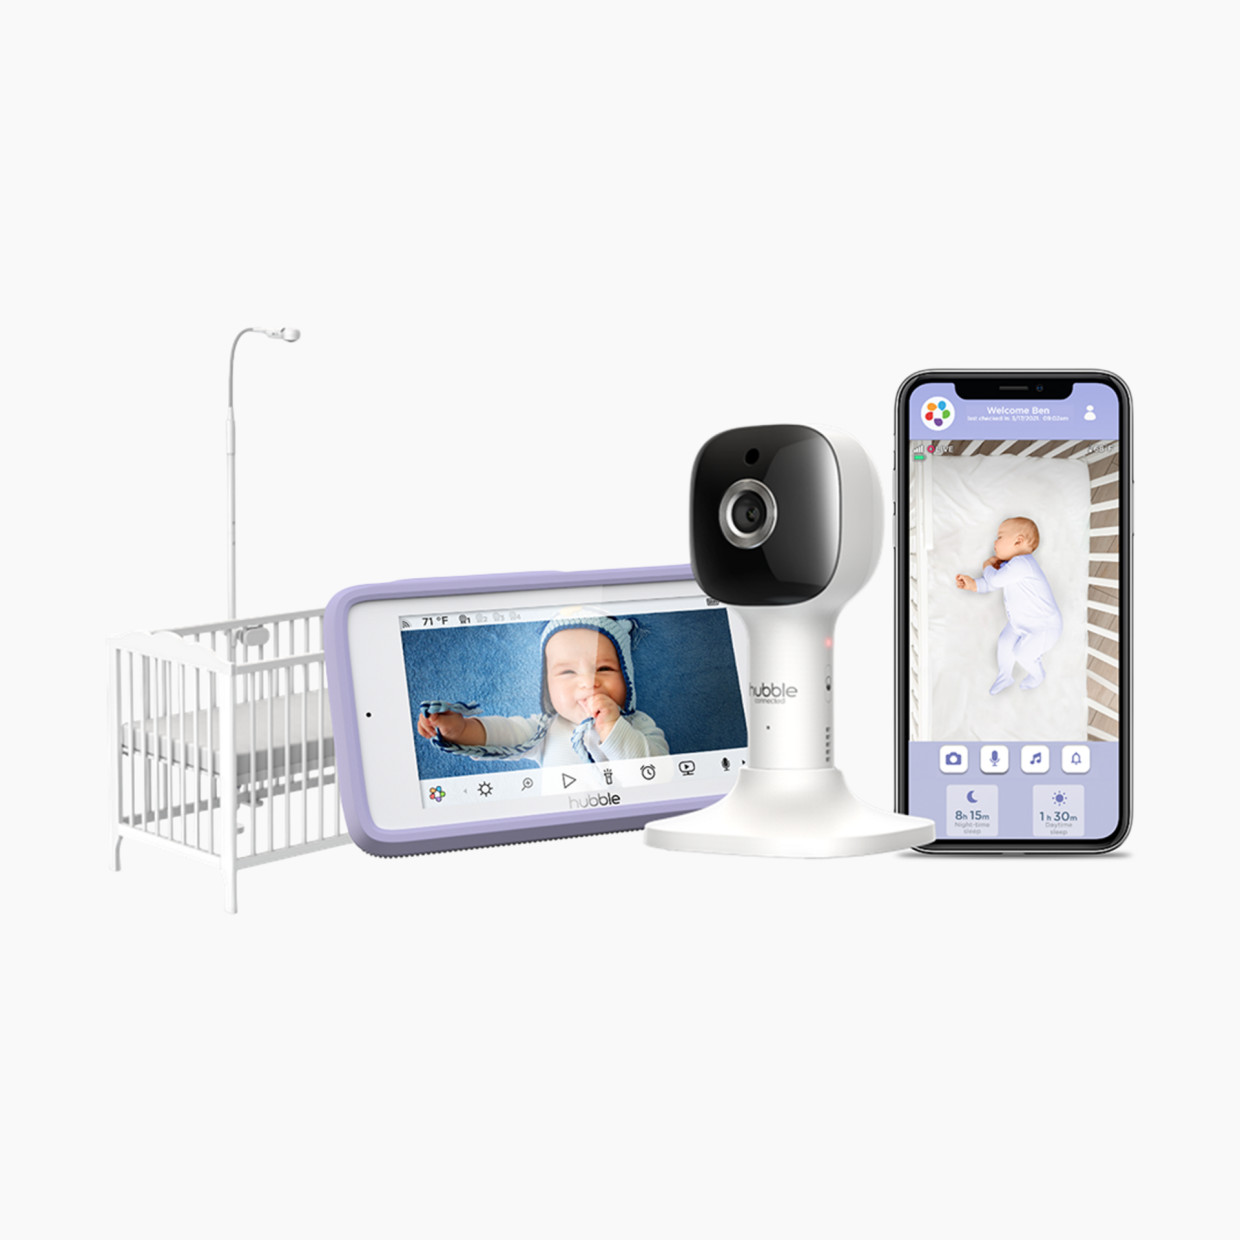 Hubble Connected Nursery Pal Crib Edition: 5" Smart HD Baby Monitor with Night Light, Touch Screen Viewer & Crib Mount.